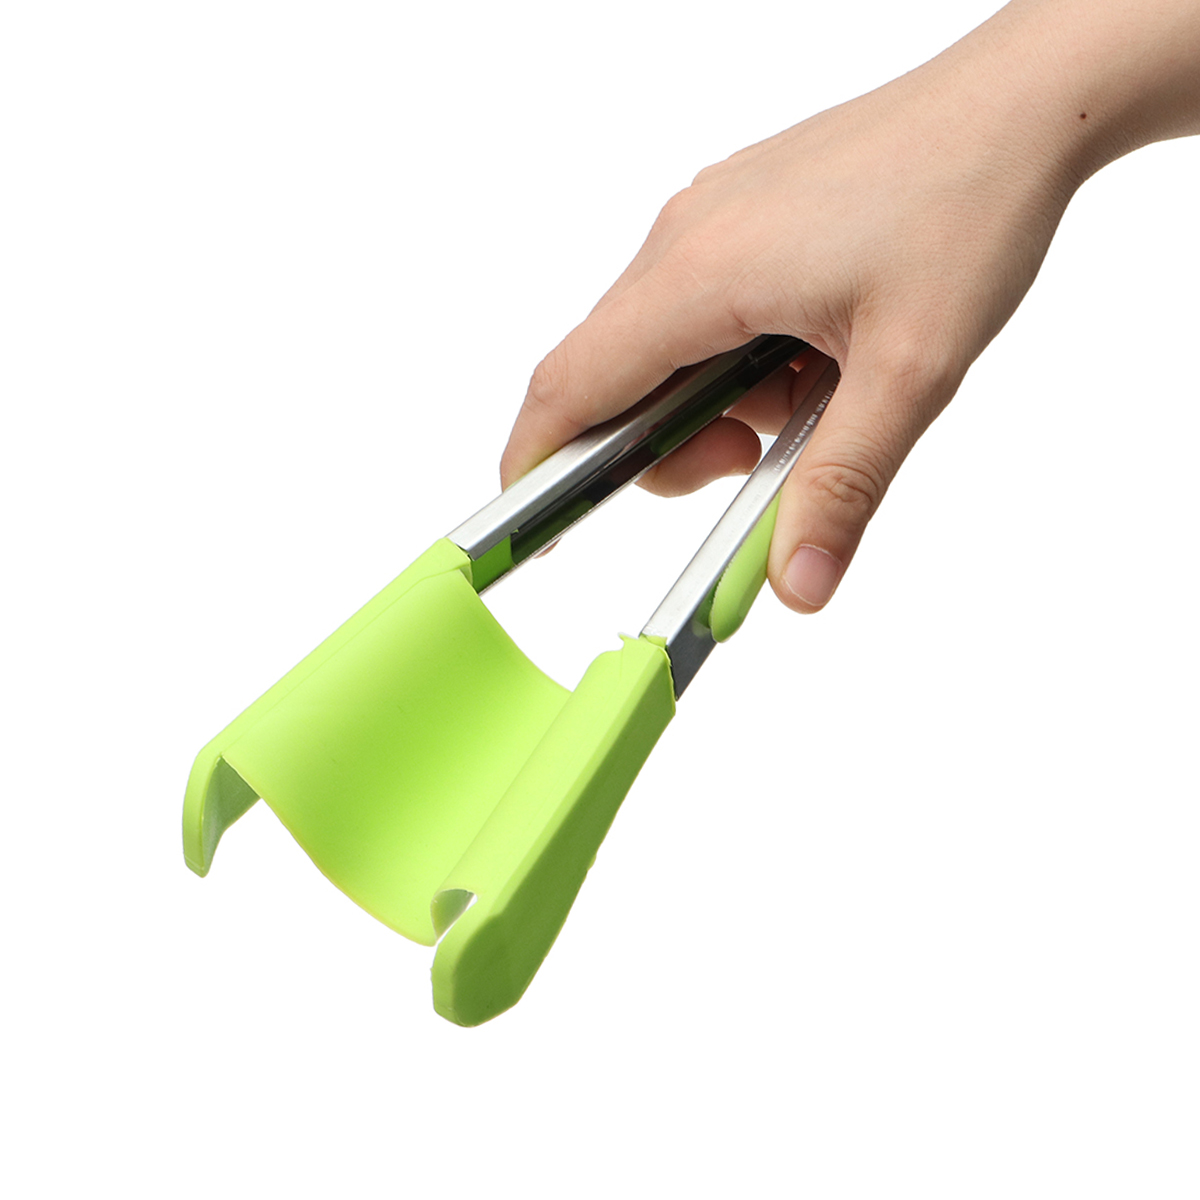 2-in-1--Non-stick-Clever-Tongs-Heat-Resistant-Silicone-Spatula-Cooking-Food-Clip-Camping-Picnic-BBQ-1329346-10